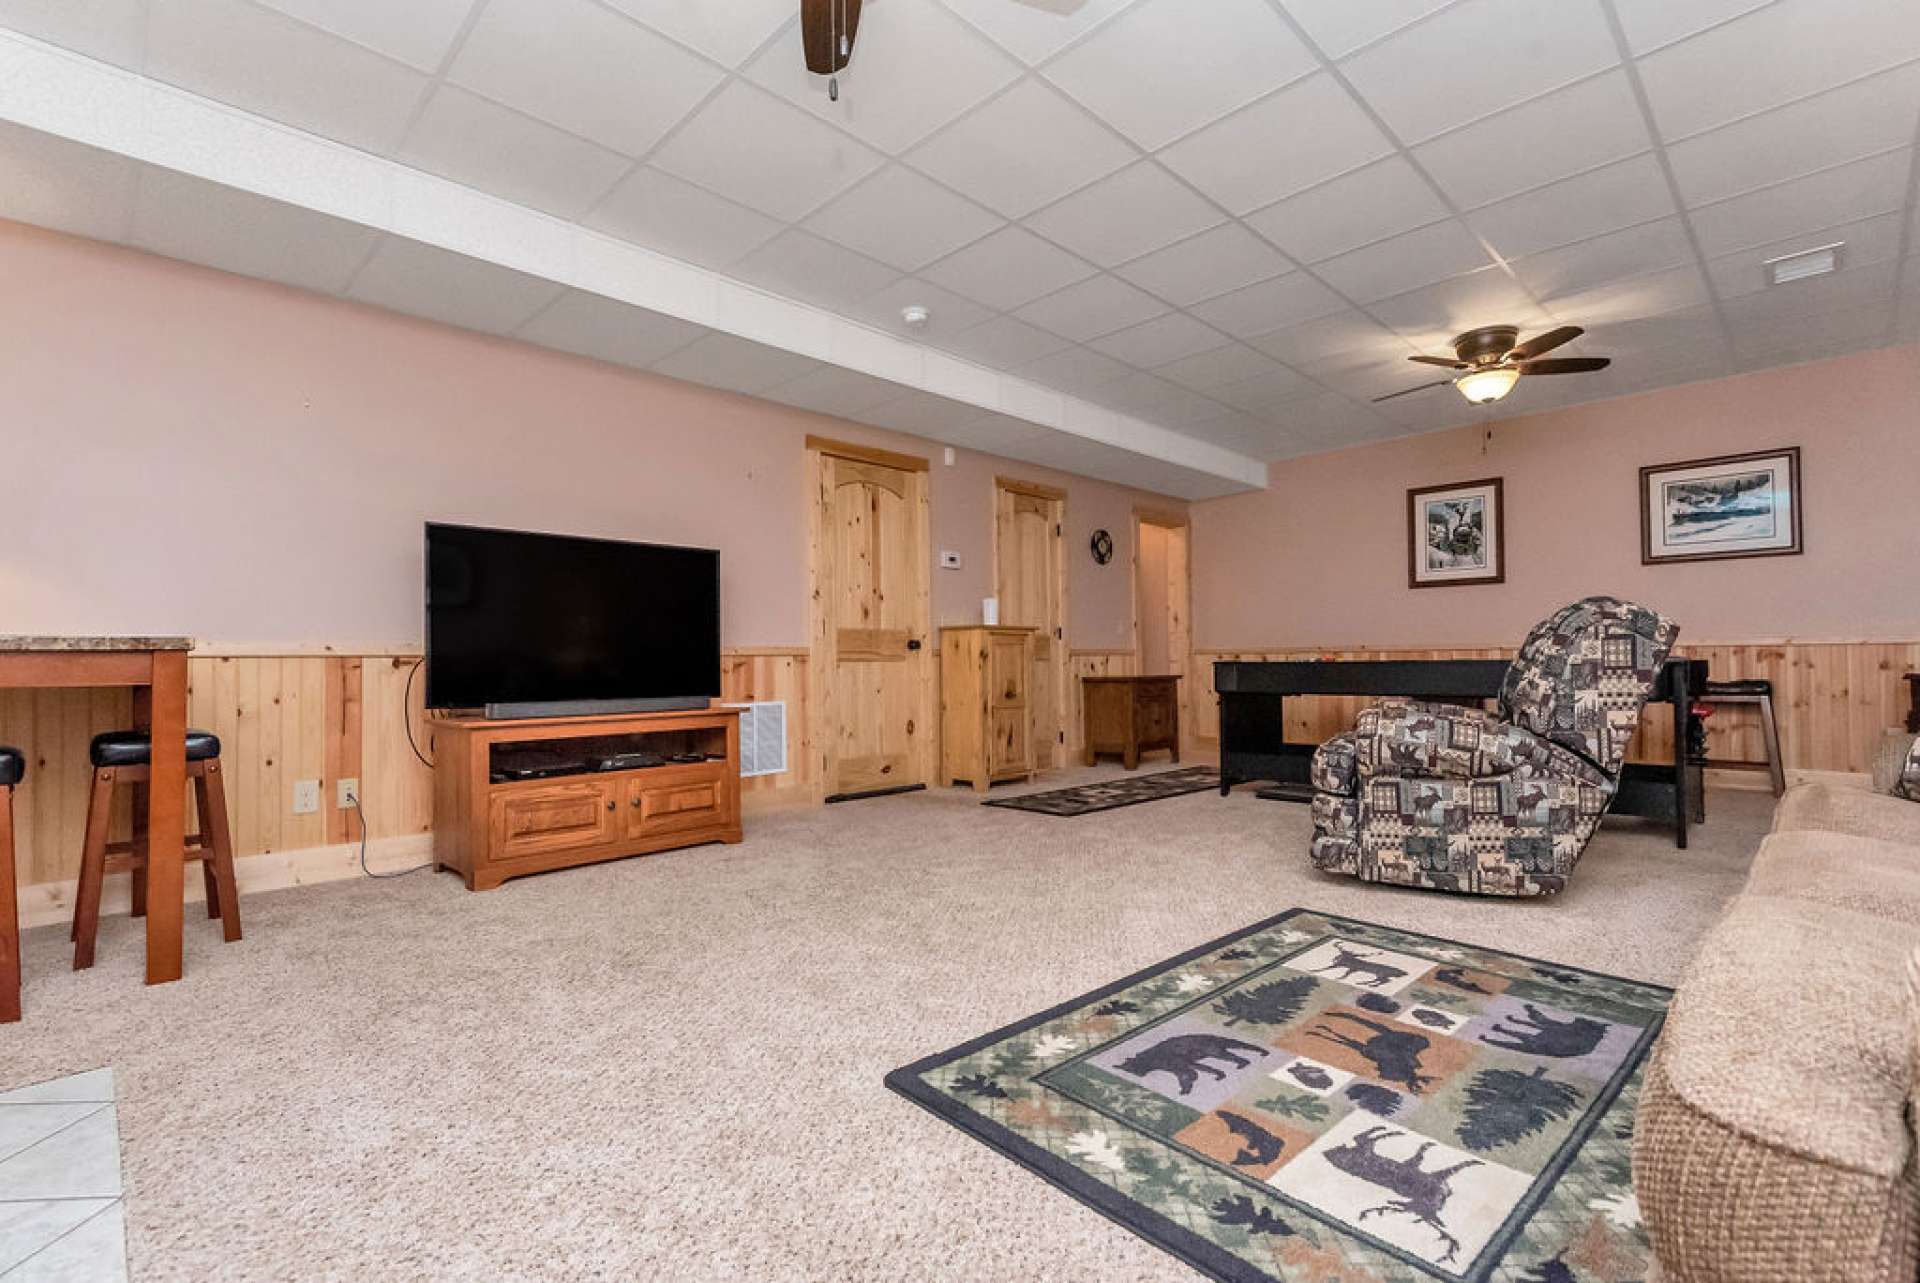 This room leads to the spacious utility room, garage, and back patio.